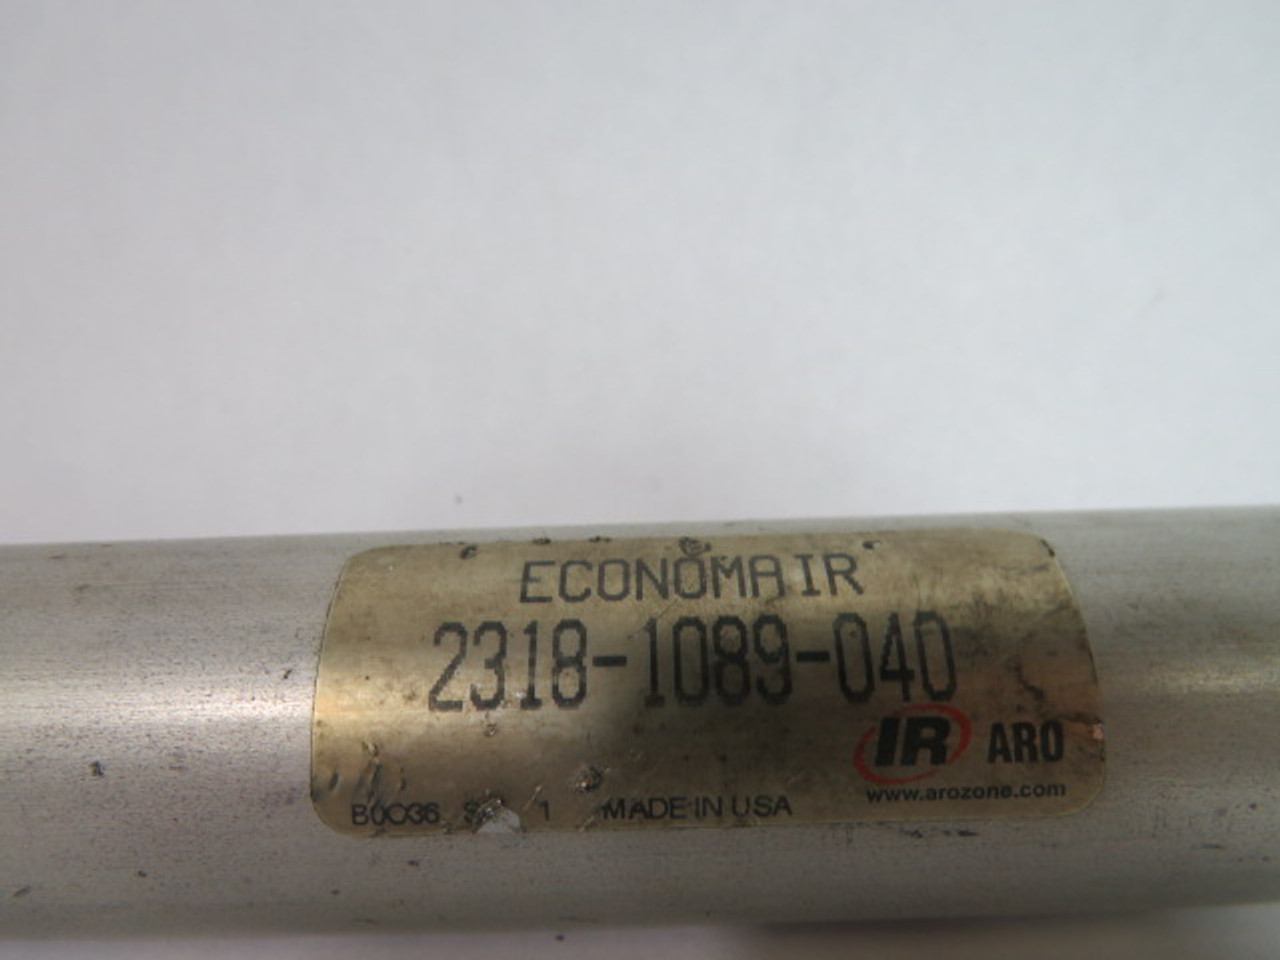 Economair 2318-1089-040 Air Cylinder 1-1/8" Bore 4" Stroke USED